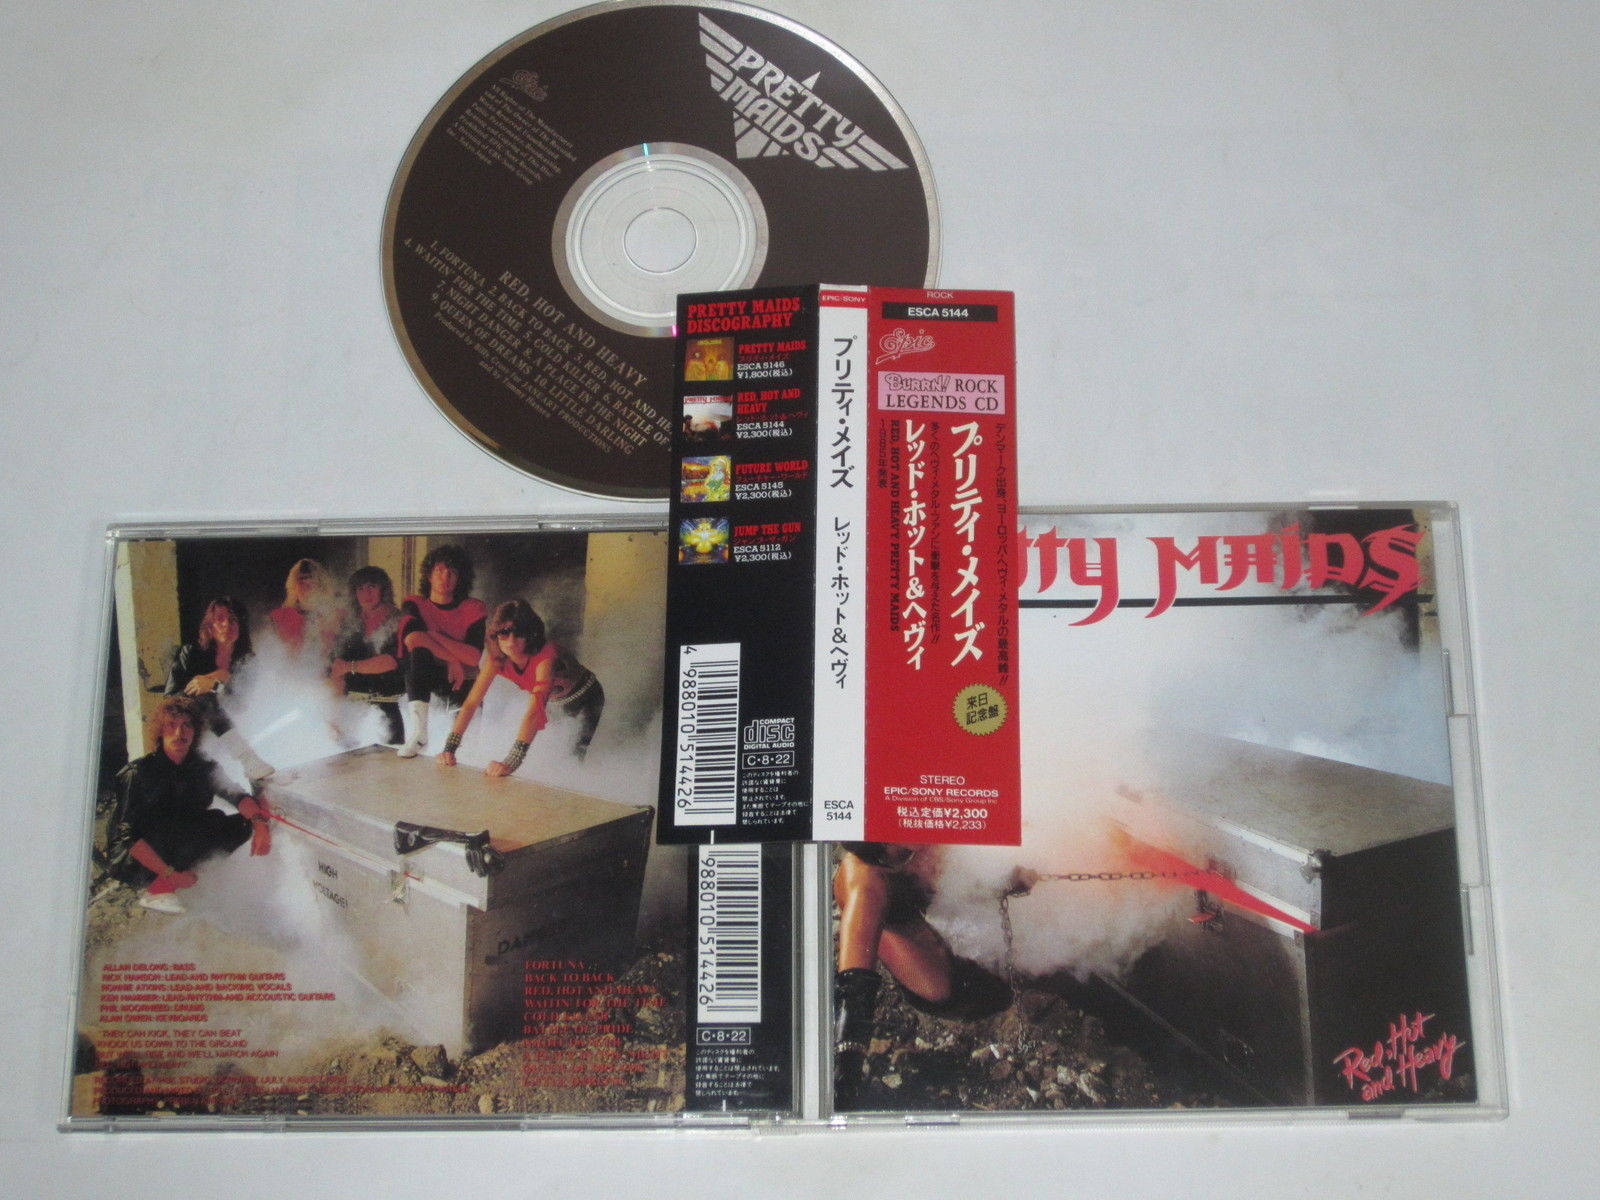 PRETTY MAIDS Red hot and heavy CD JAPAN PRESS + OBI